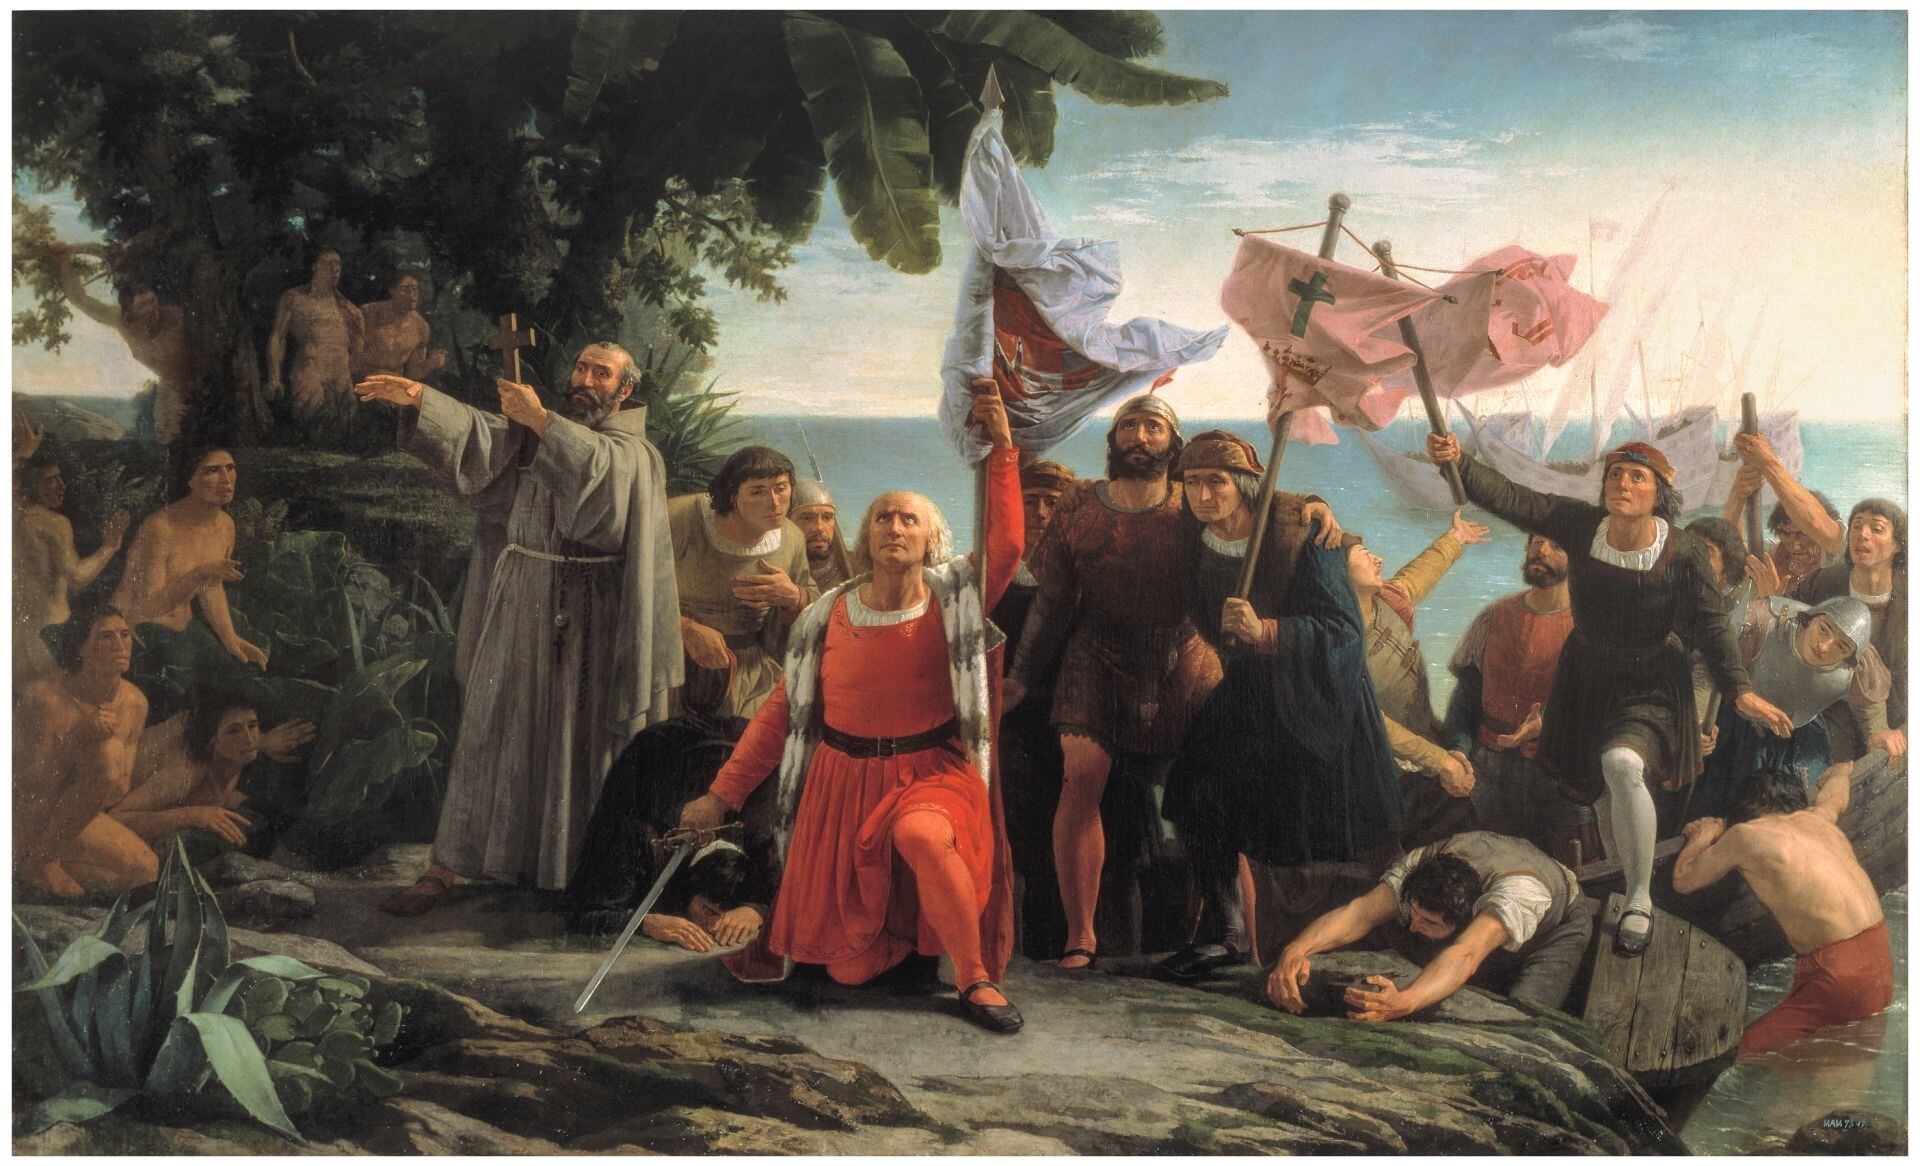 The painting ‘First landing of Christopher Columbus in America‘ (1862), by Dióscoro Teófilo Puebla y Tolín, from Prado Museum collection.